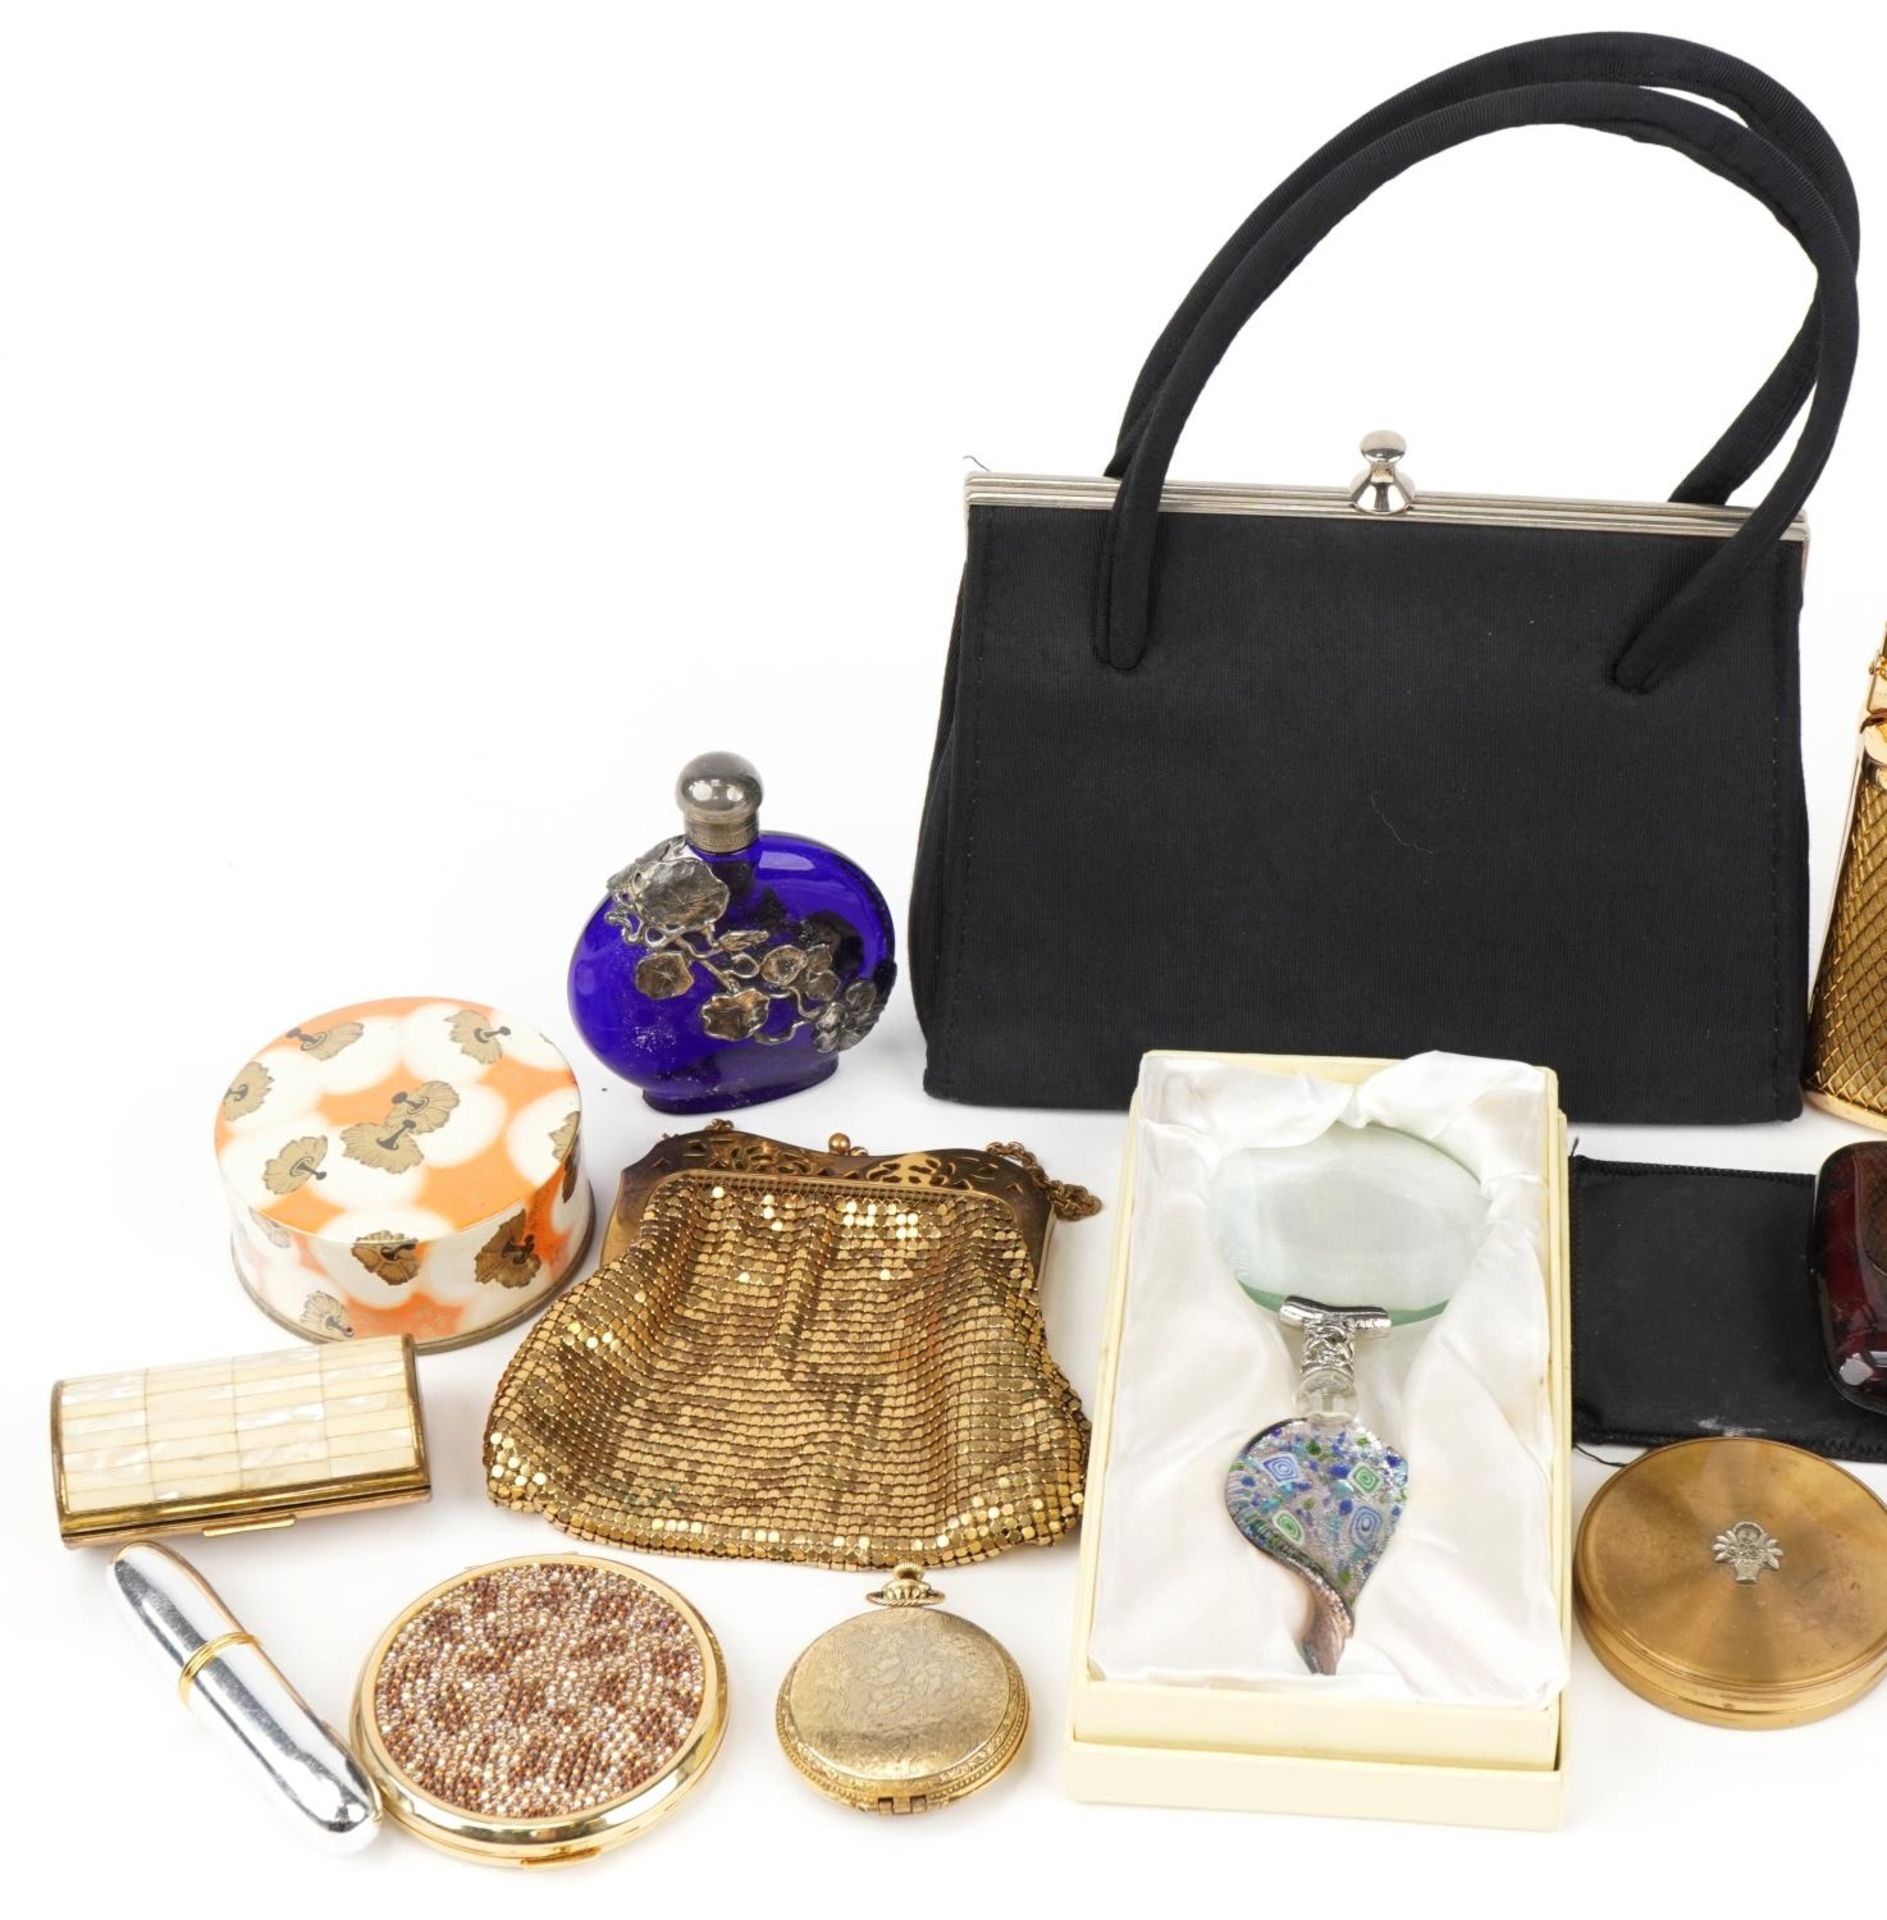 Vintage and later vanity items including compacts, evening bags and scent bottle with white metal - Image 2 of 3